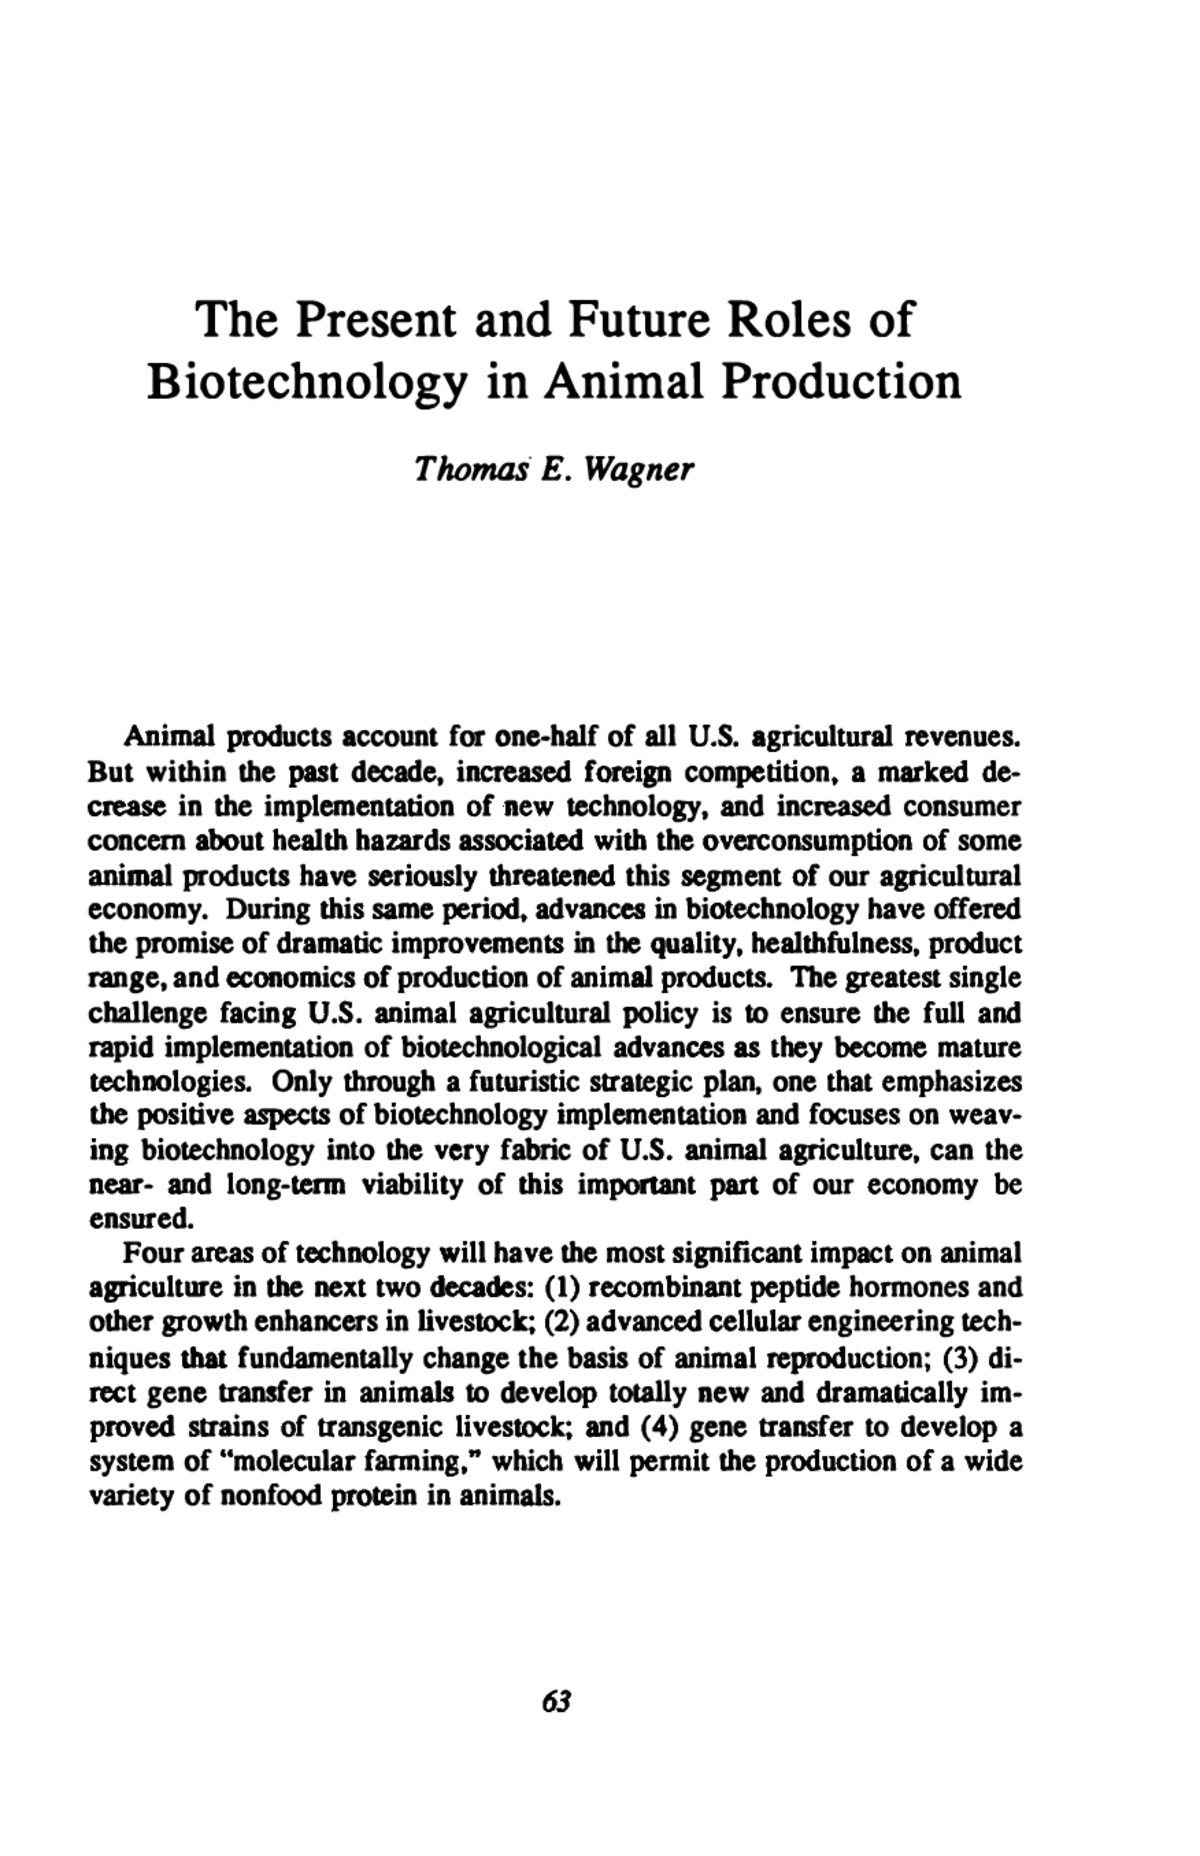 The Present and Future Roles of Biotechnology in Animal Production |  Technology and Agricultural Policy: Proceedings of a Symposium |The  National Academies Press